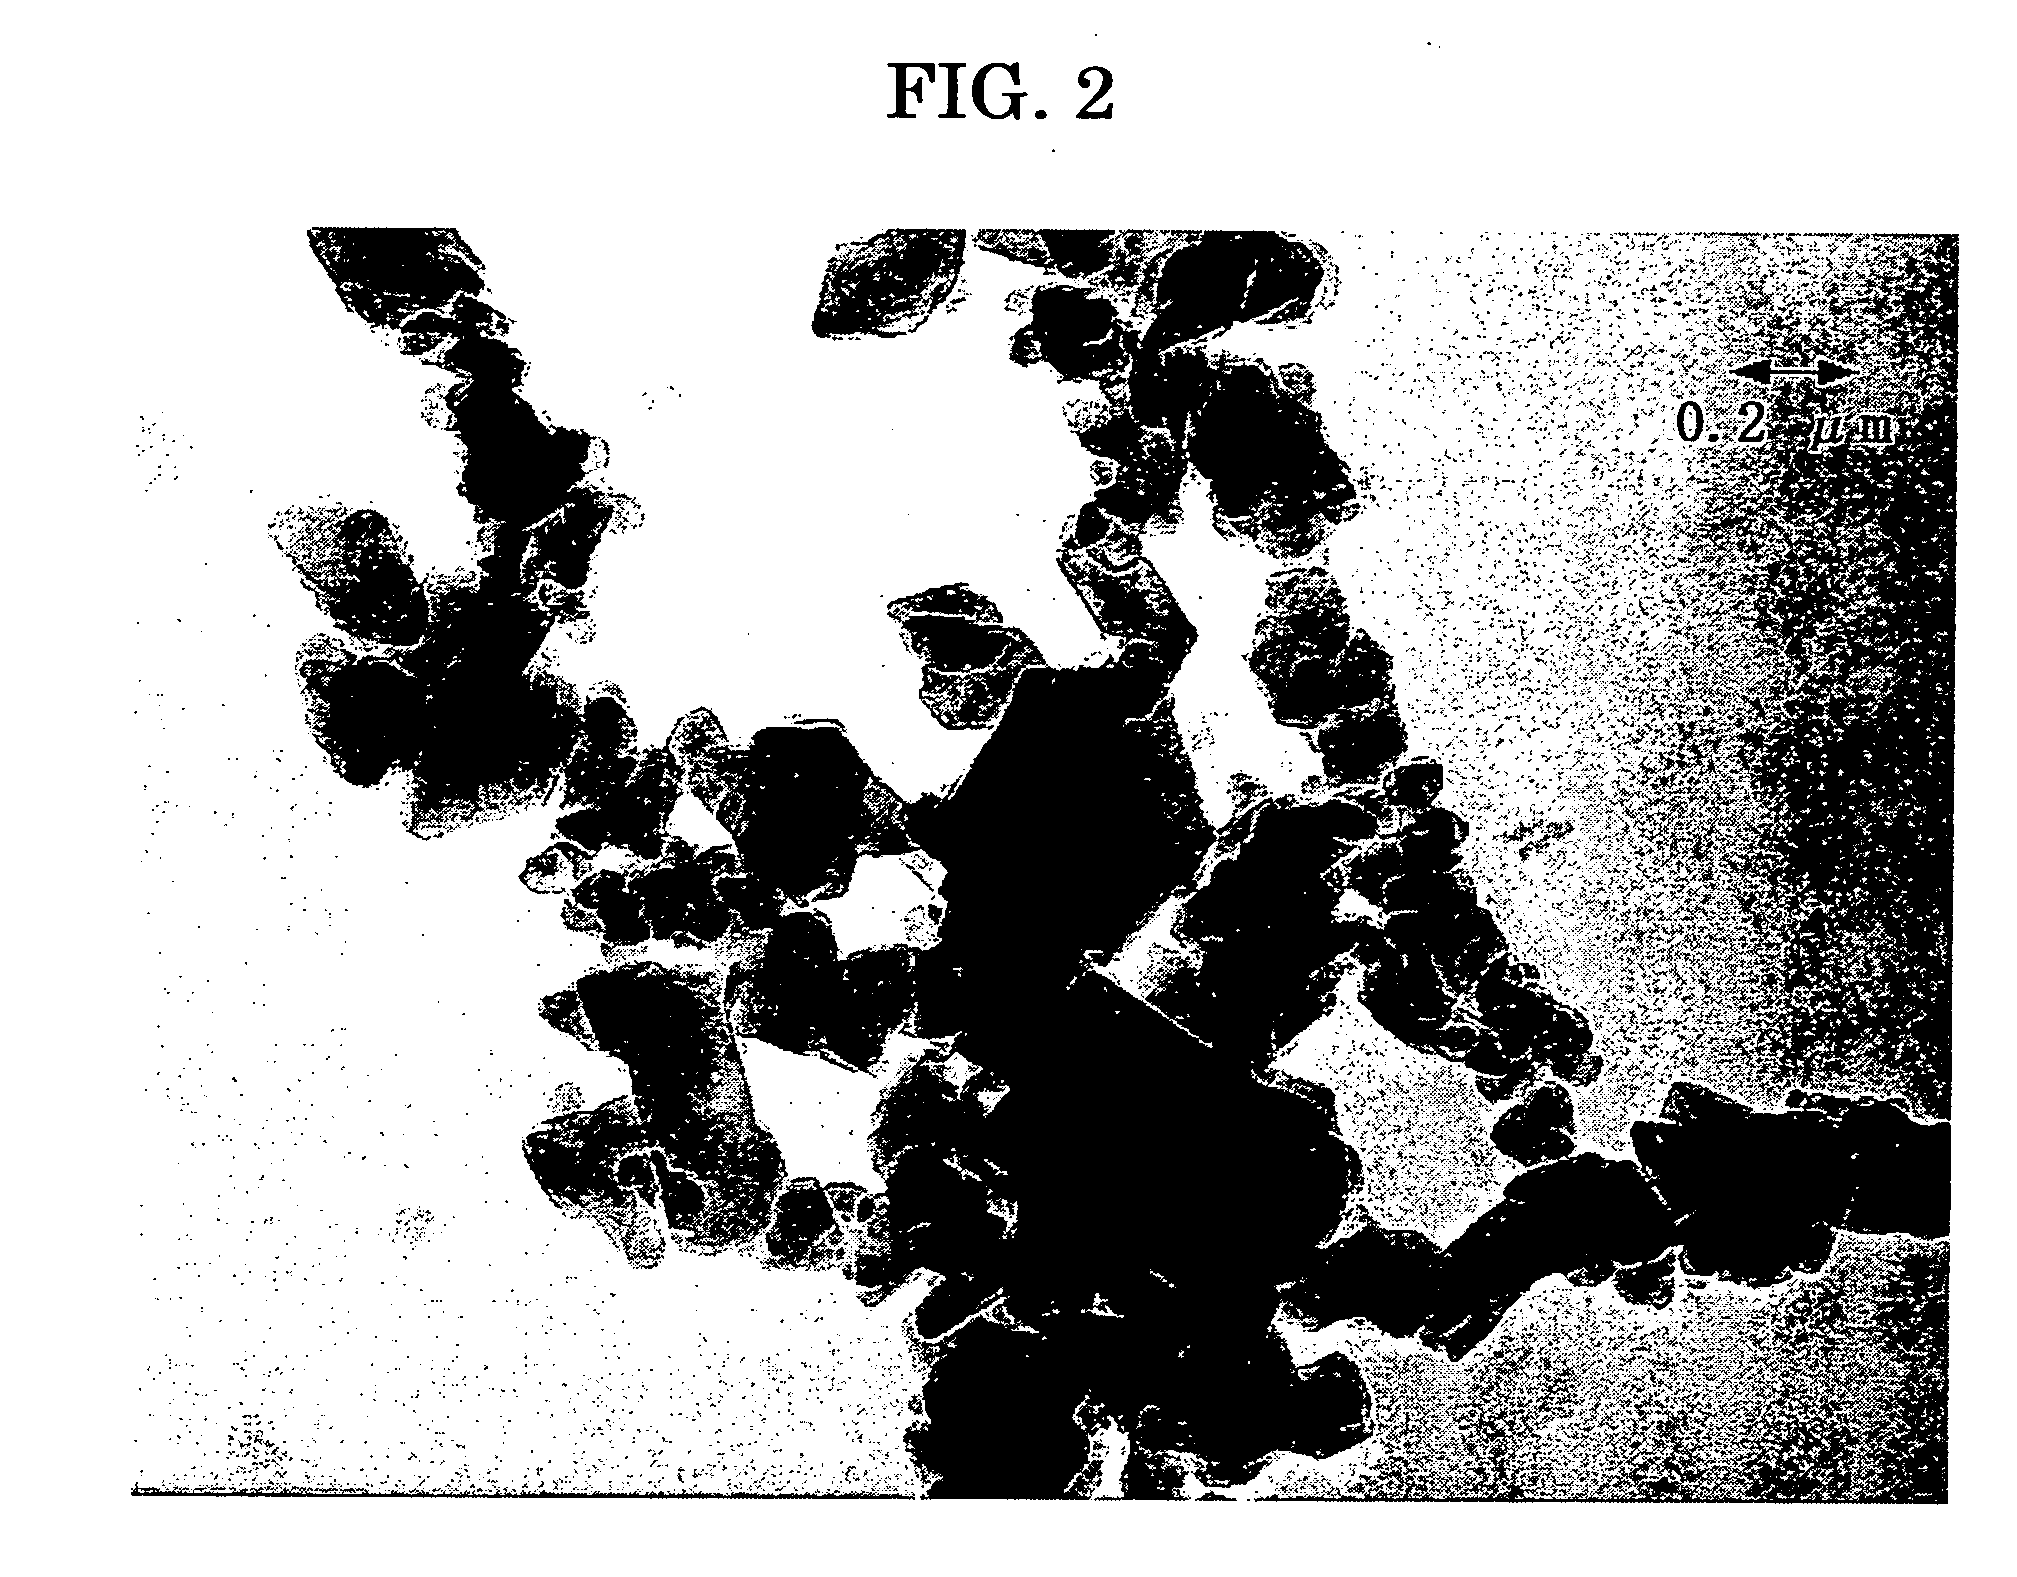 Photoconductor, image forming apparatus, image forming process, and process cartridge